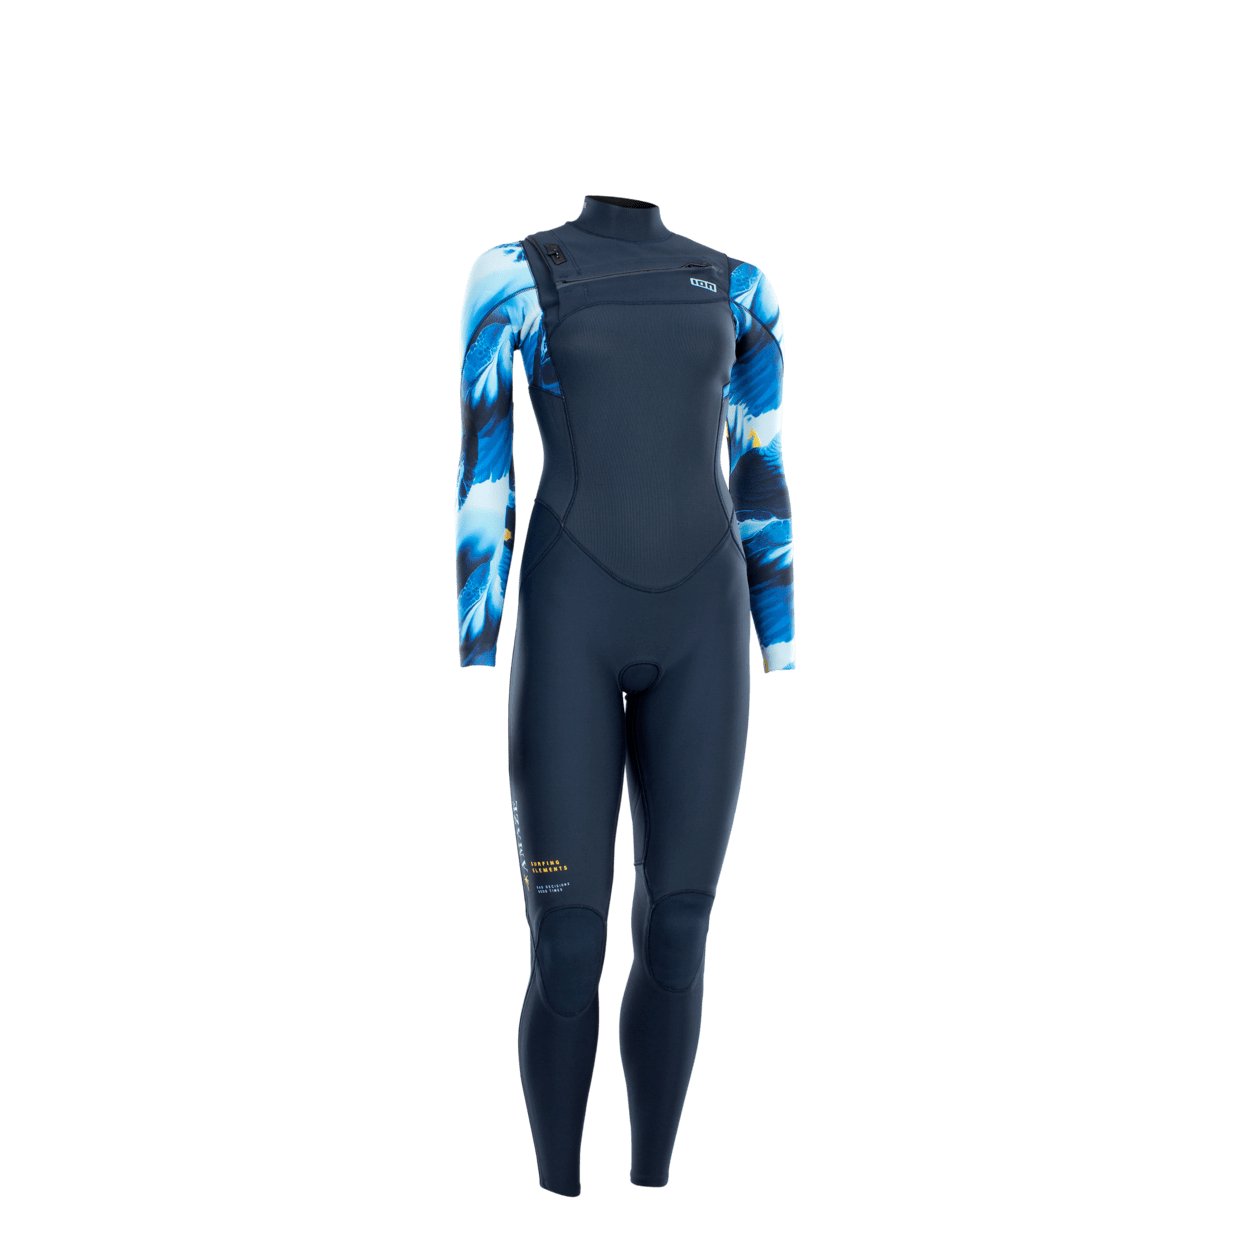 ION Amaze Amp Semidry 3/2 FZ DL 2021 - Worthing Watersports - 9008415956685 - Wetsuits - ION Water